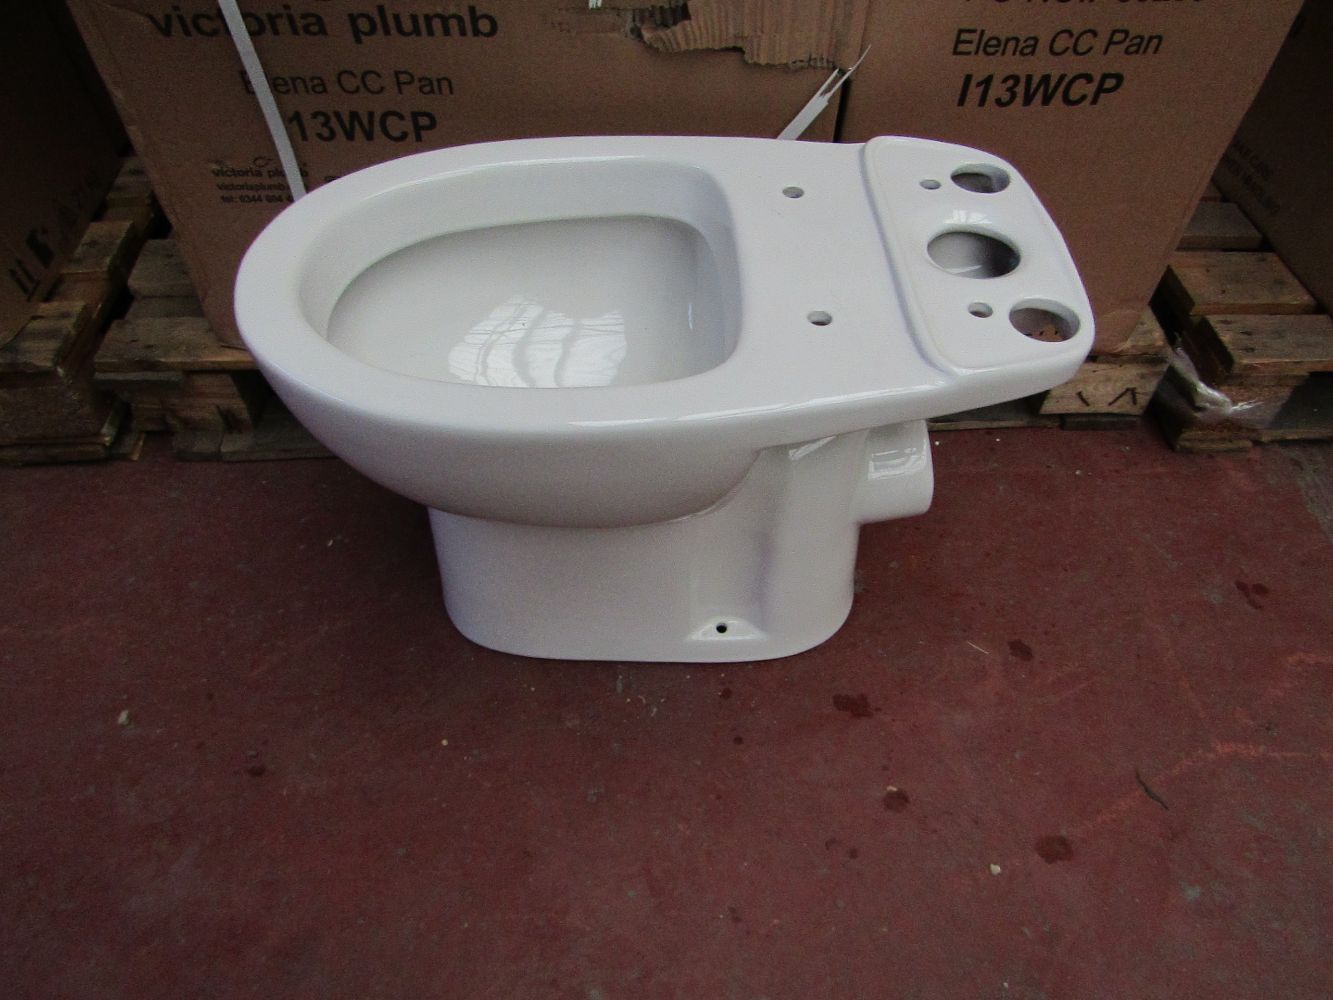 bathroom stock including; Johnson Tiles, toilet pans, bathroom accessories and much more!